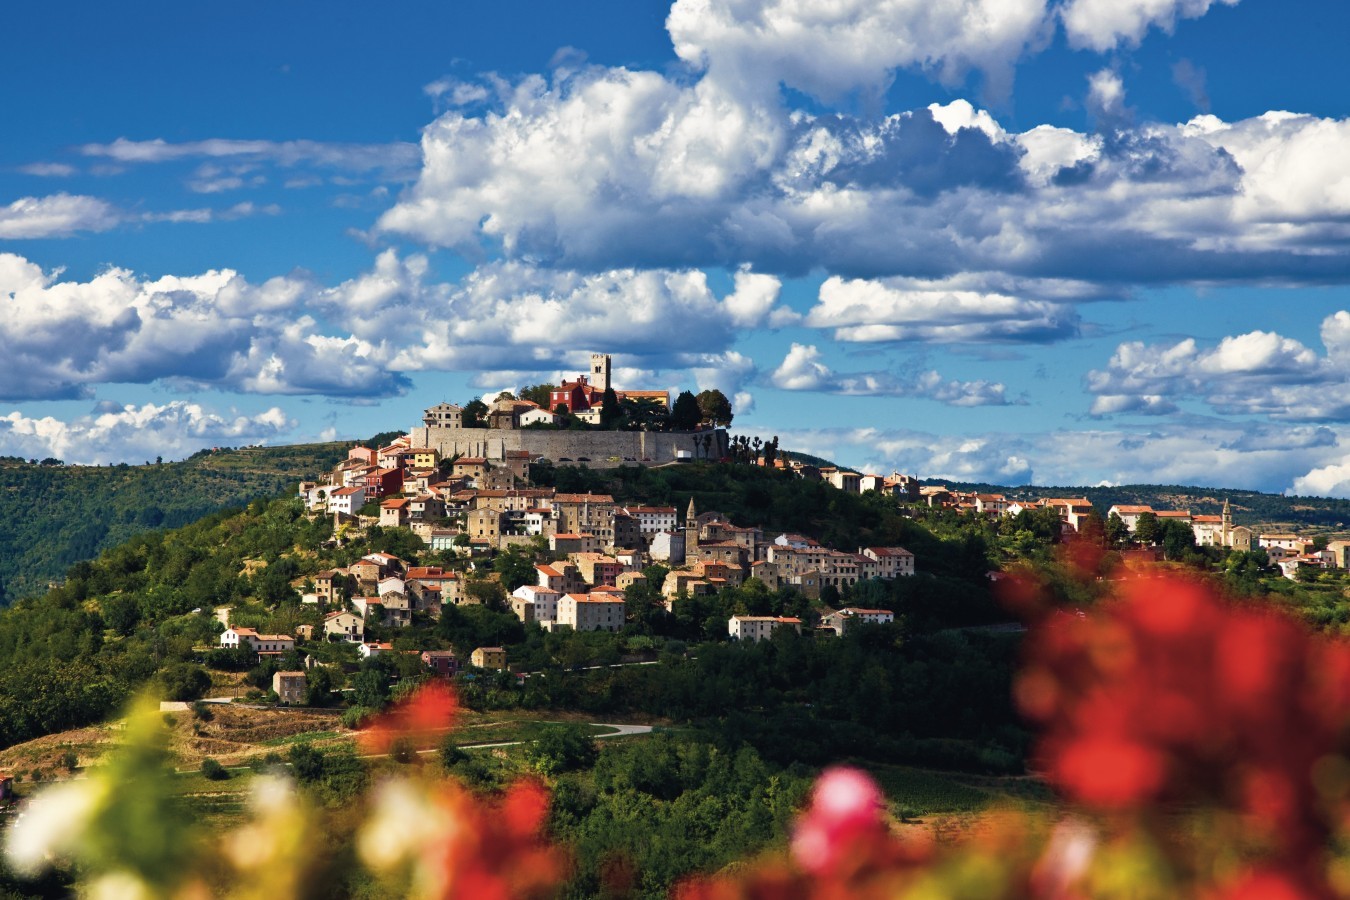 Make way to Istria for the Motovun Film Festival from July 27 to 31